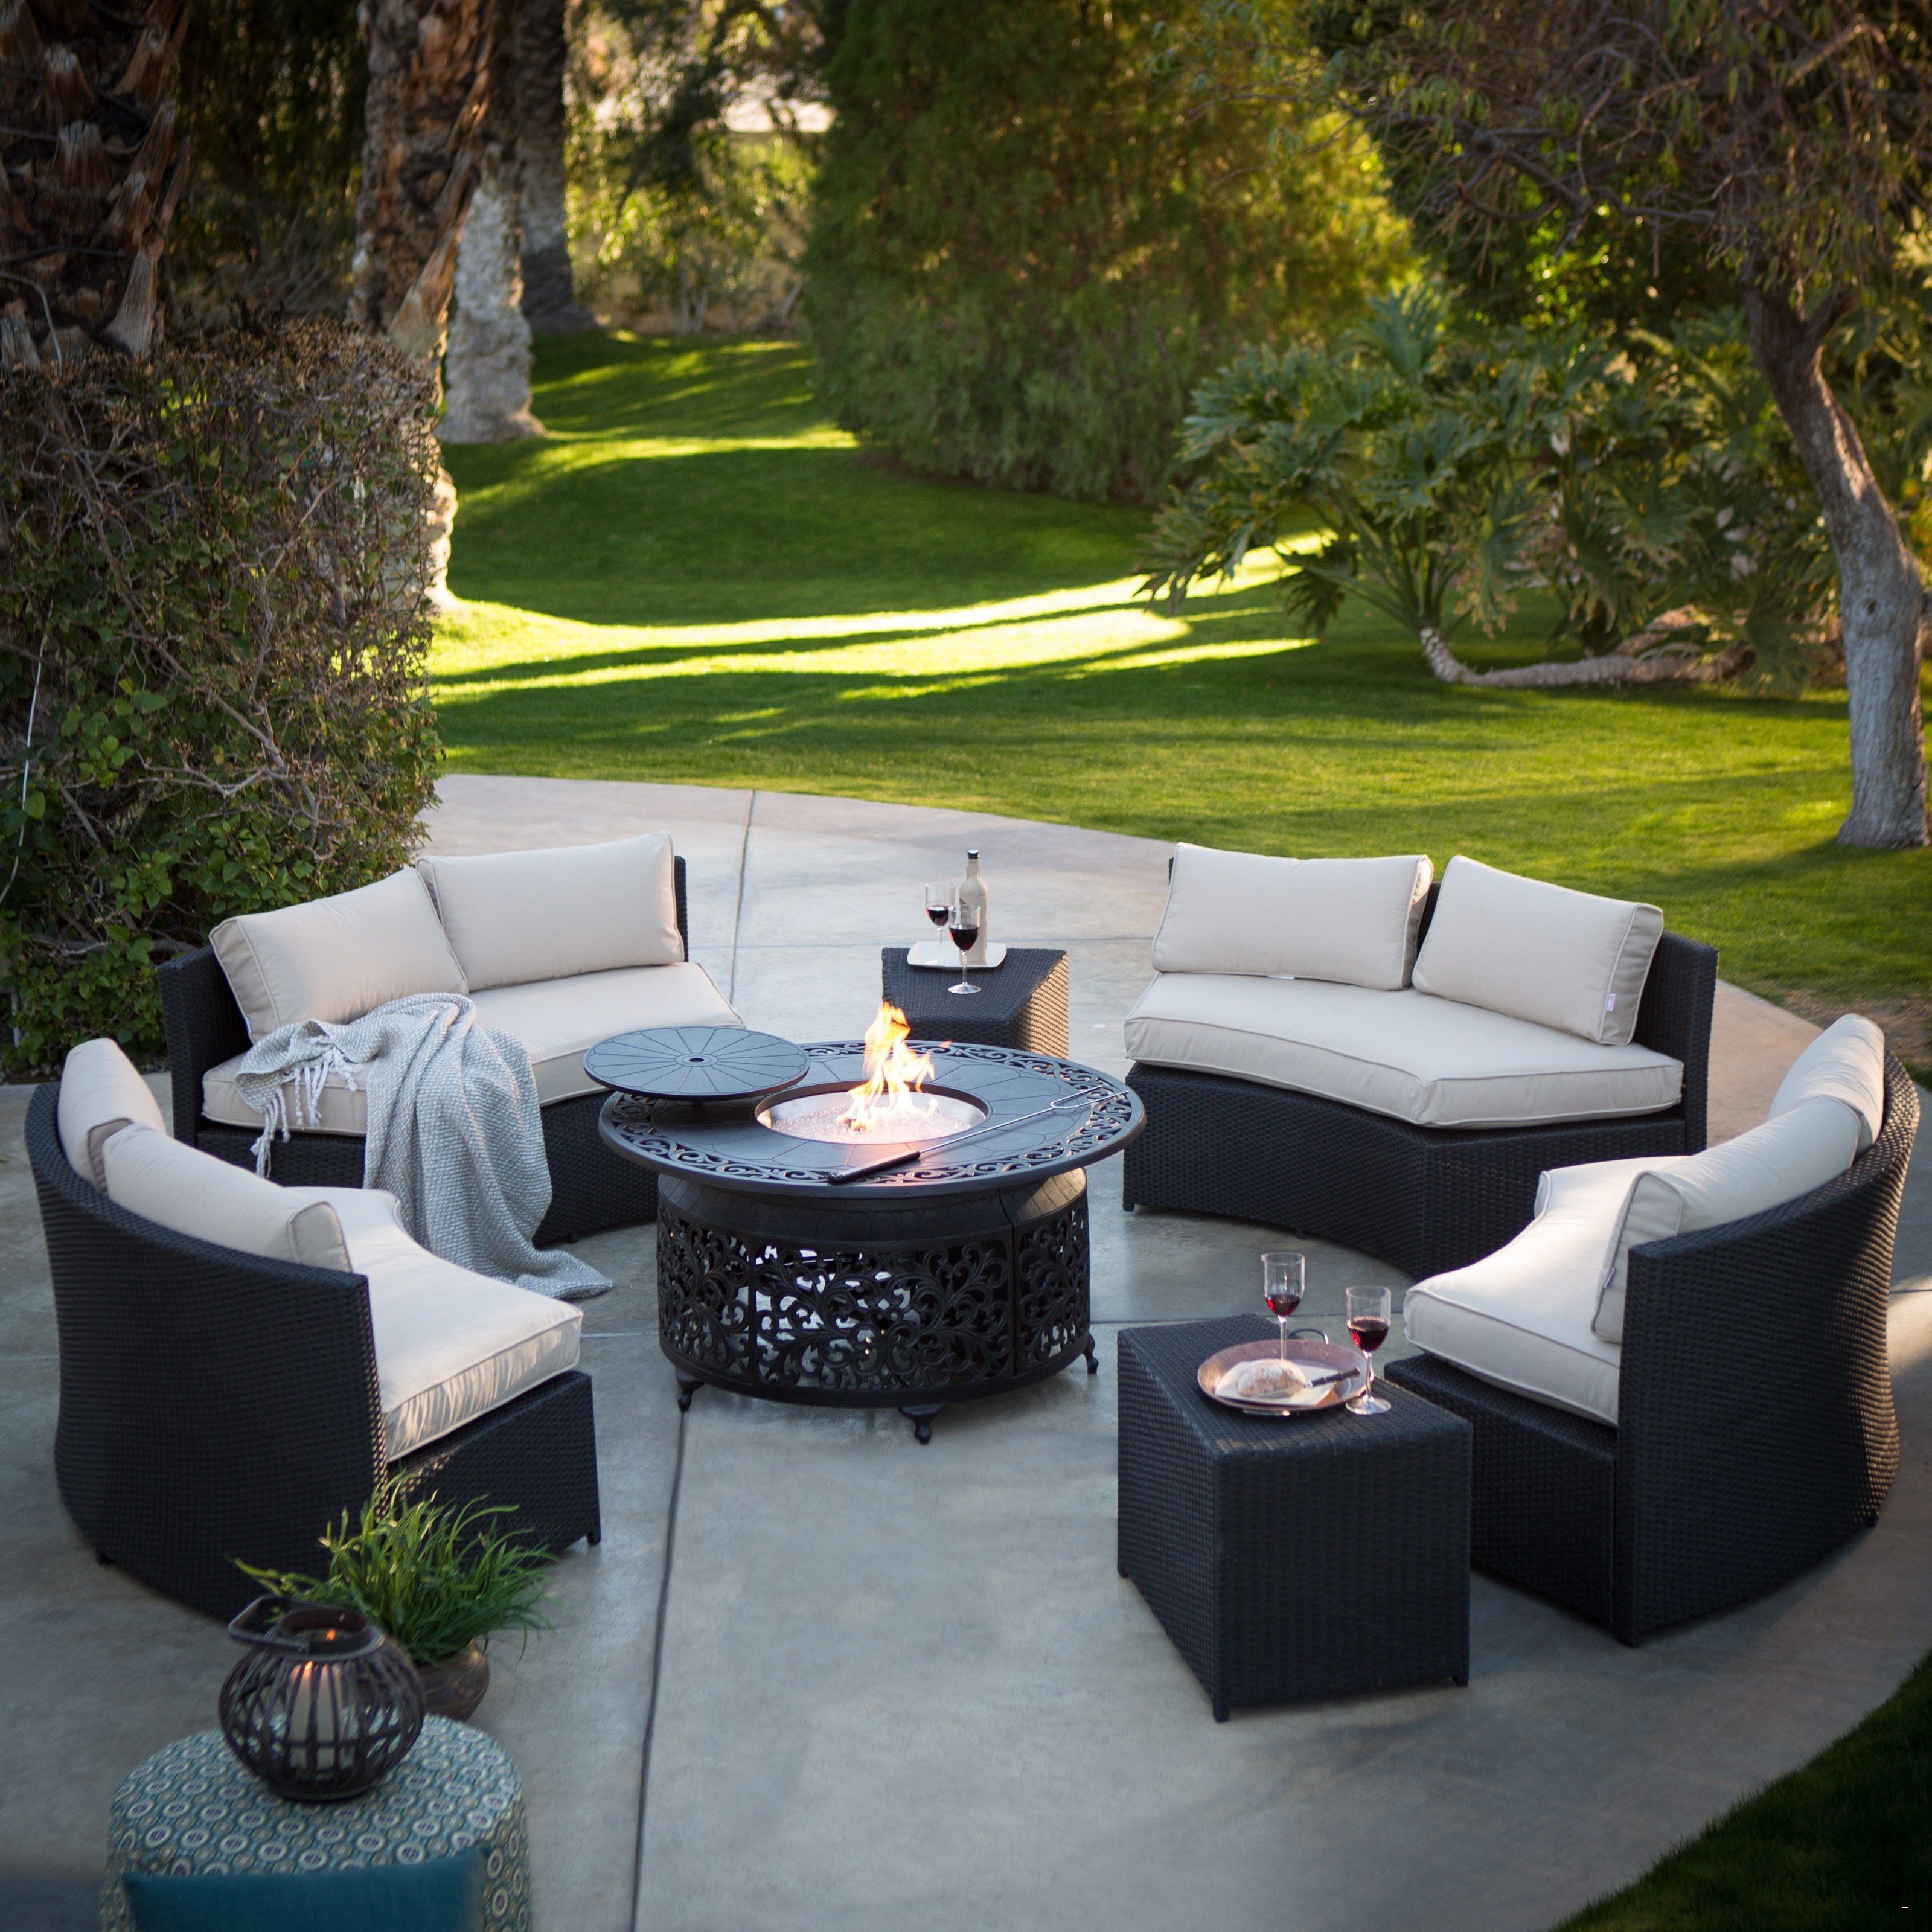 Popular Wonderful Fire Pit Conversation Set Patio Sets With Belham Living With Hayneedle Patio Conversation Sets (View 13 of 15)